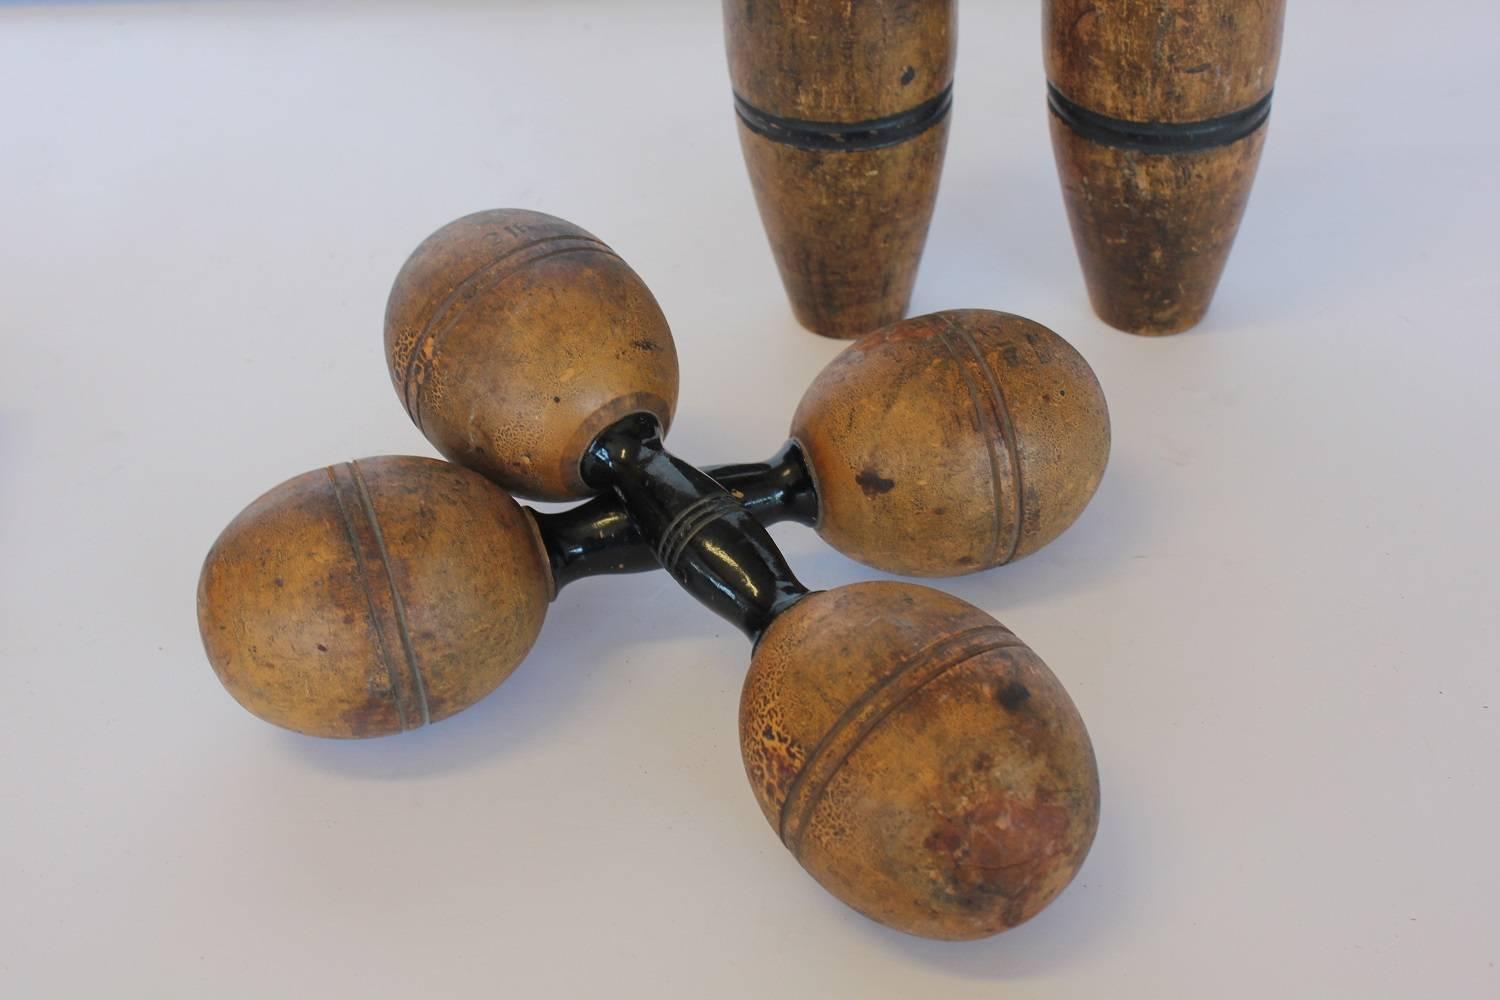 Antique hand-painted wooden juggling pins and dumbbells. Measures: Juggling pin: H 19